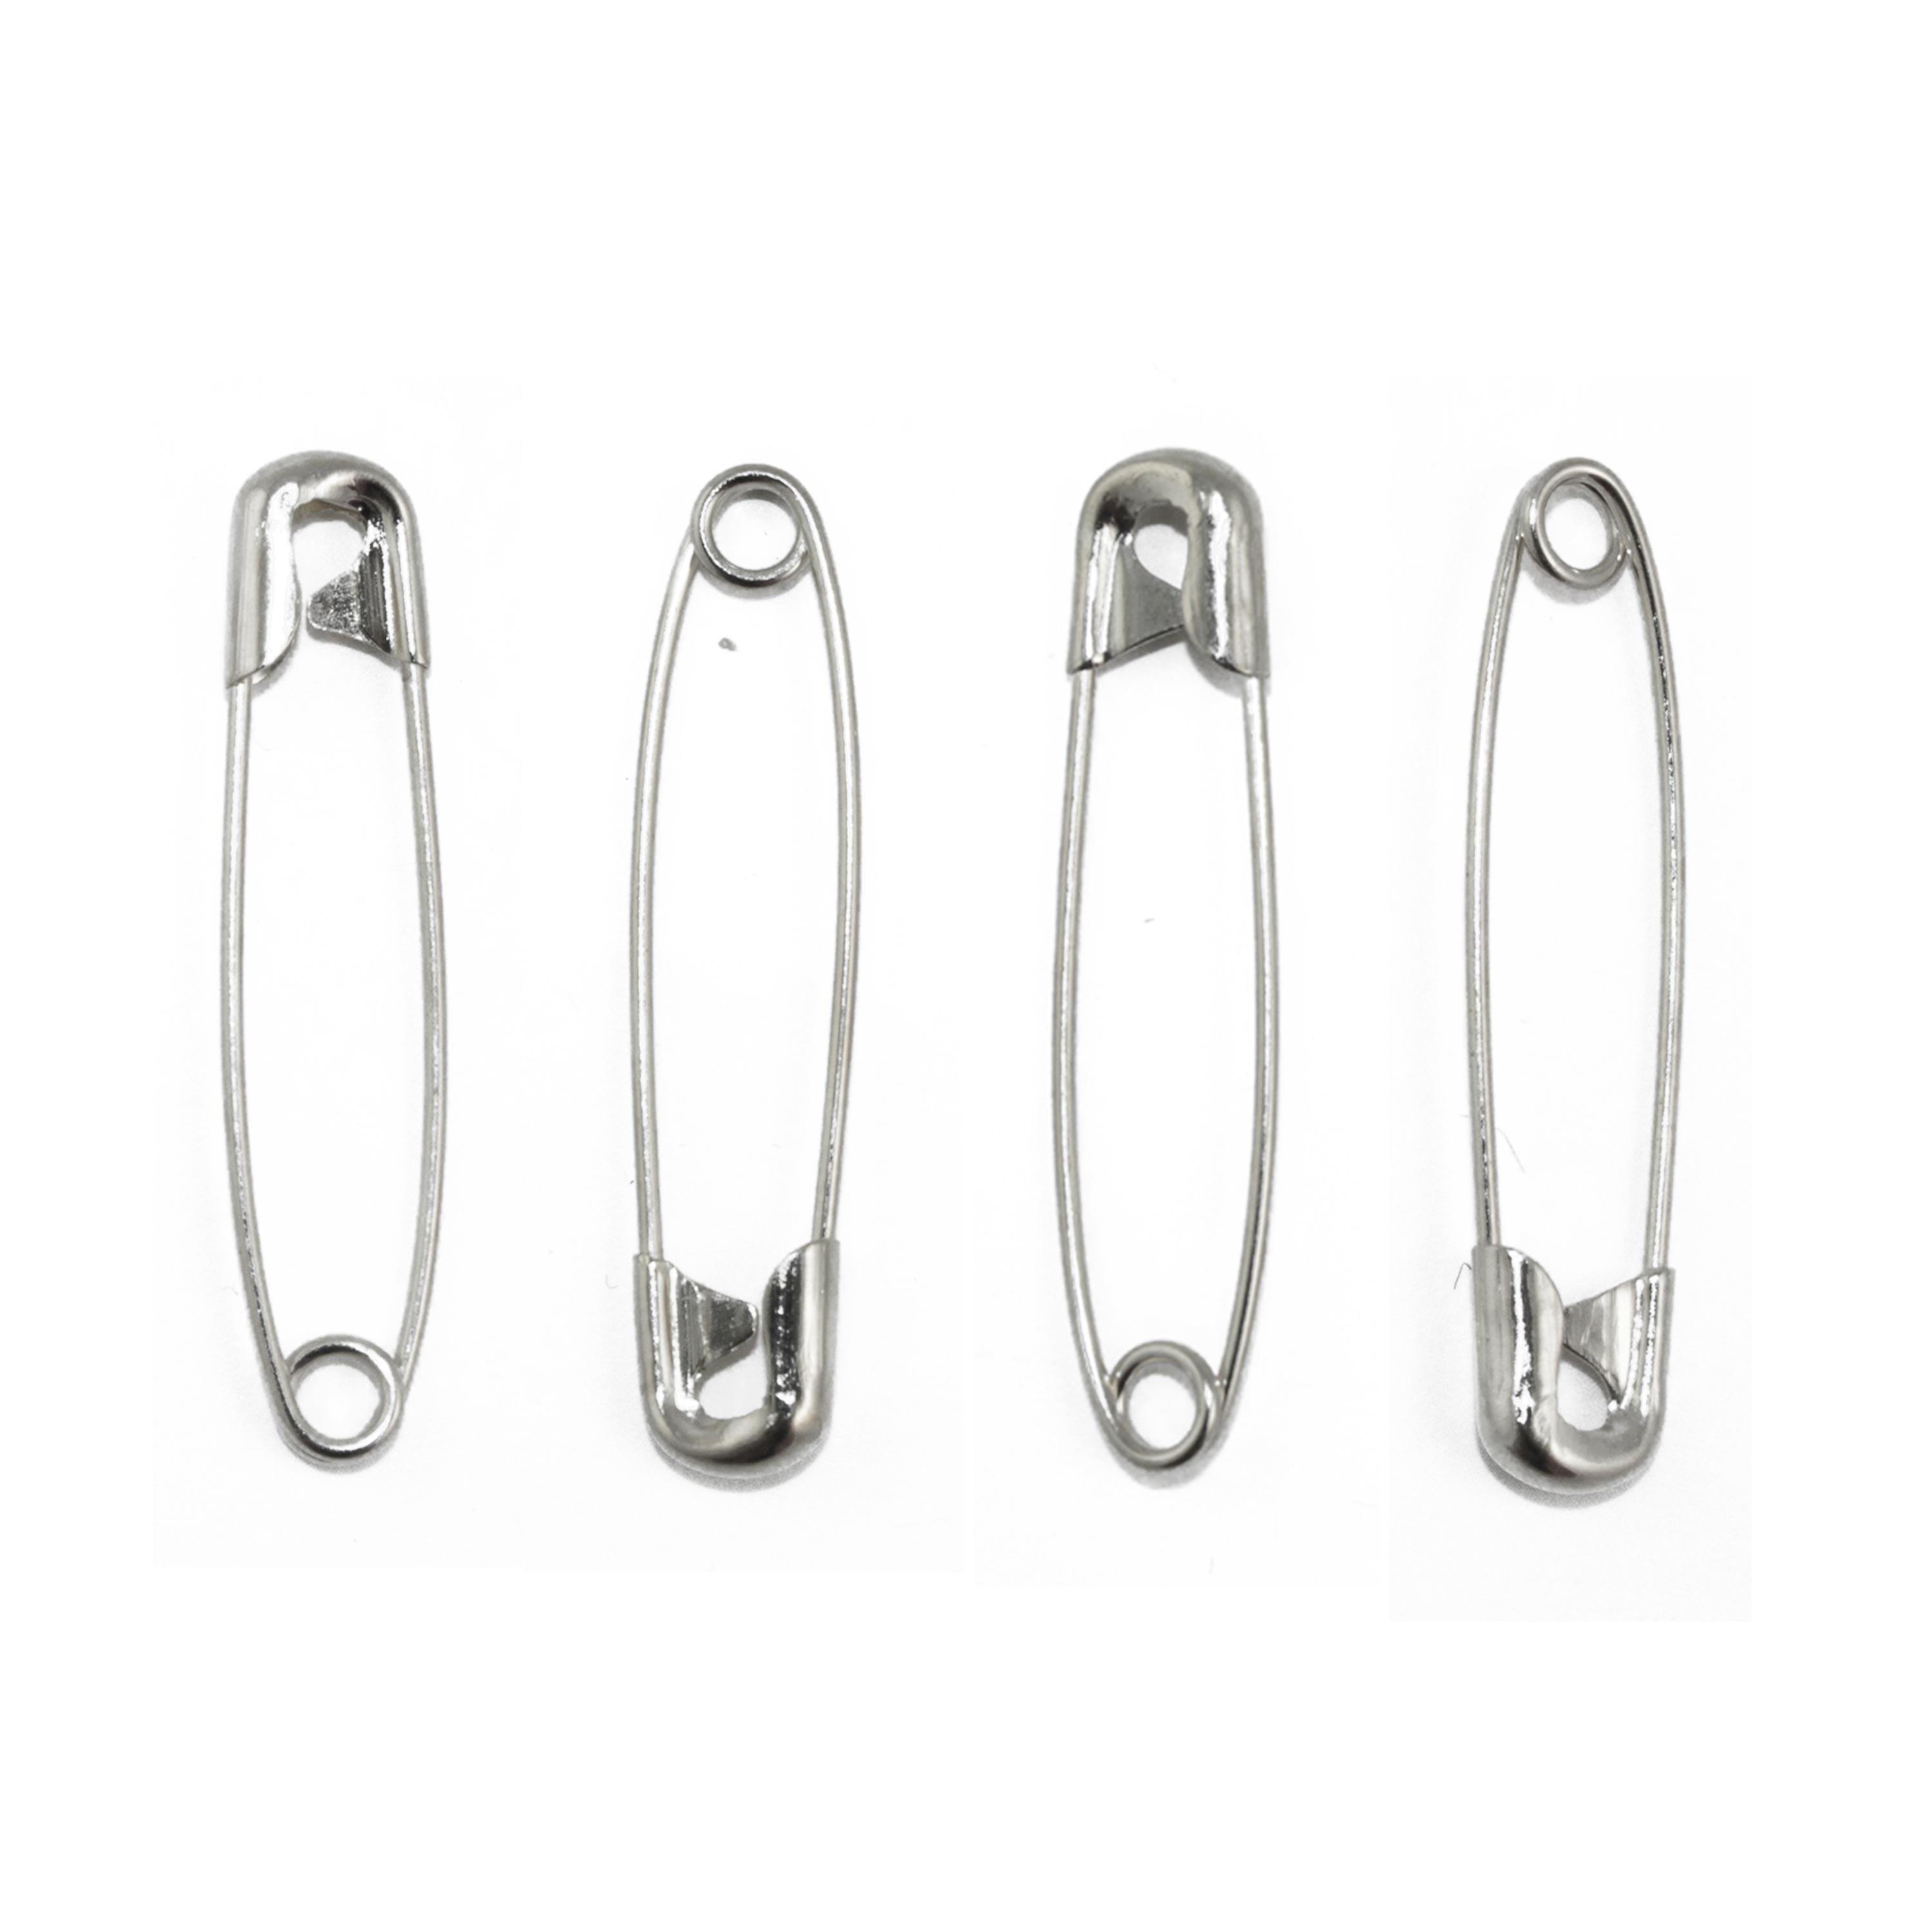 BLACK SAFETY PINS-144 Safety Pins 2 Inch Number 3 Black 